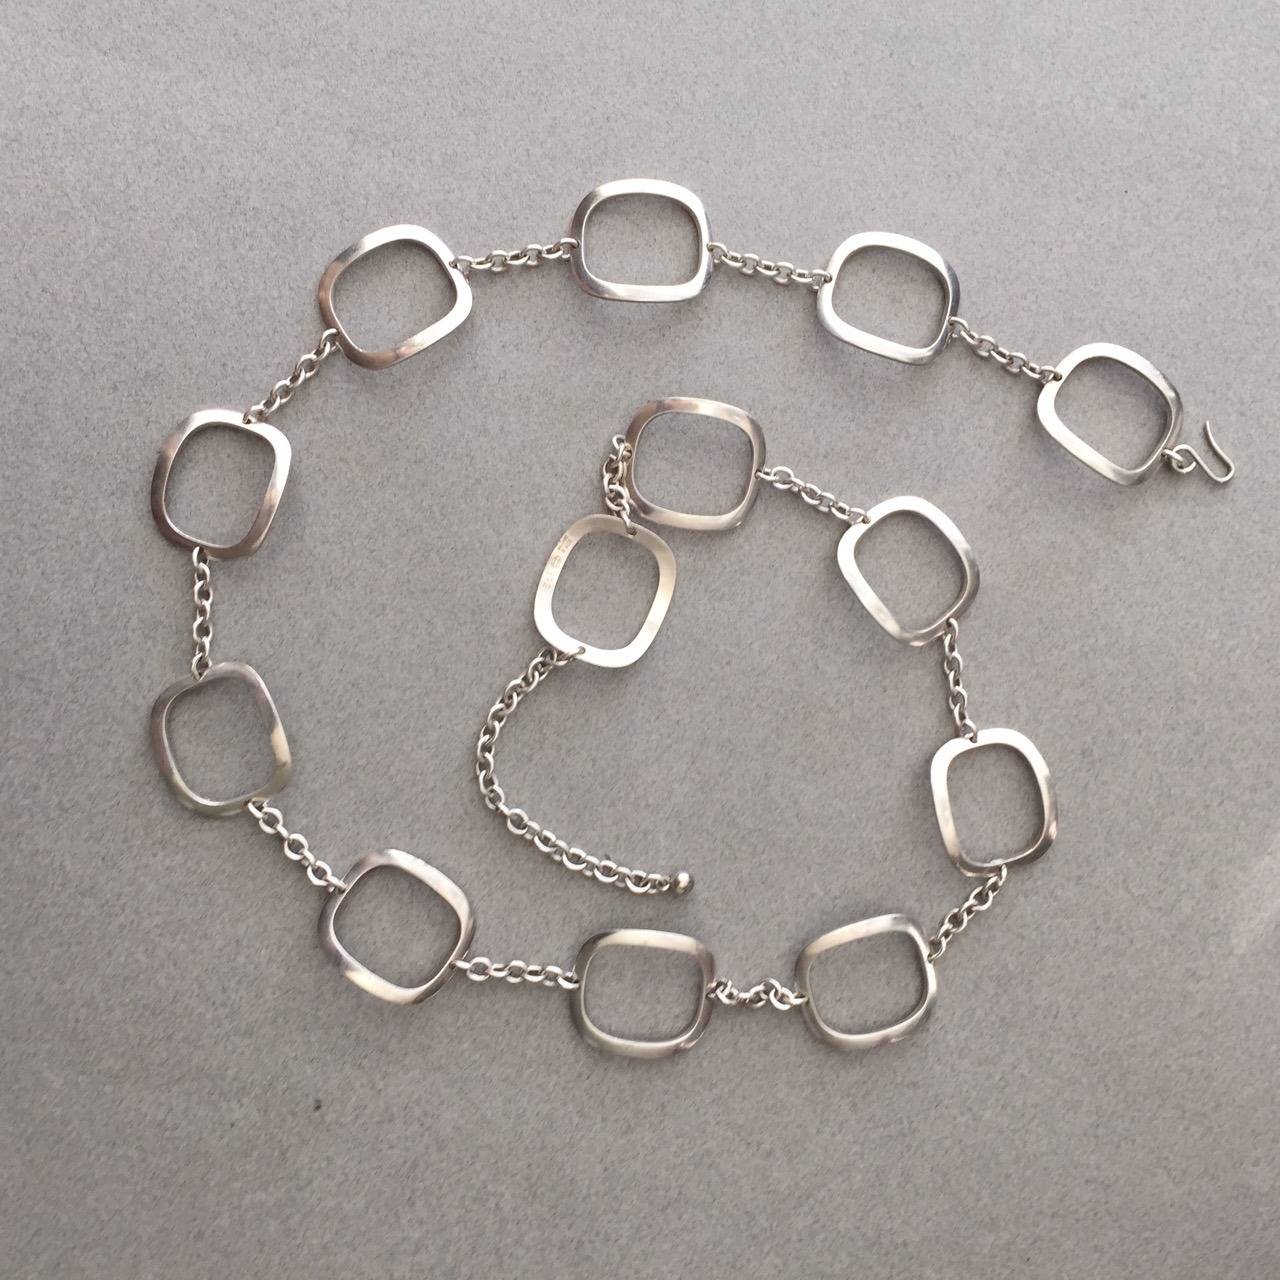 Georg Jensen sterling silver modernist belt no. 192 designed by Ibe Dahlquist. Sterling silver, circa 1970's. Comprised of 13 rectangular domed handmade links. 33" total length. Hook clasp. Matching necklace is also available. 

Excellent